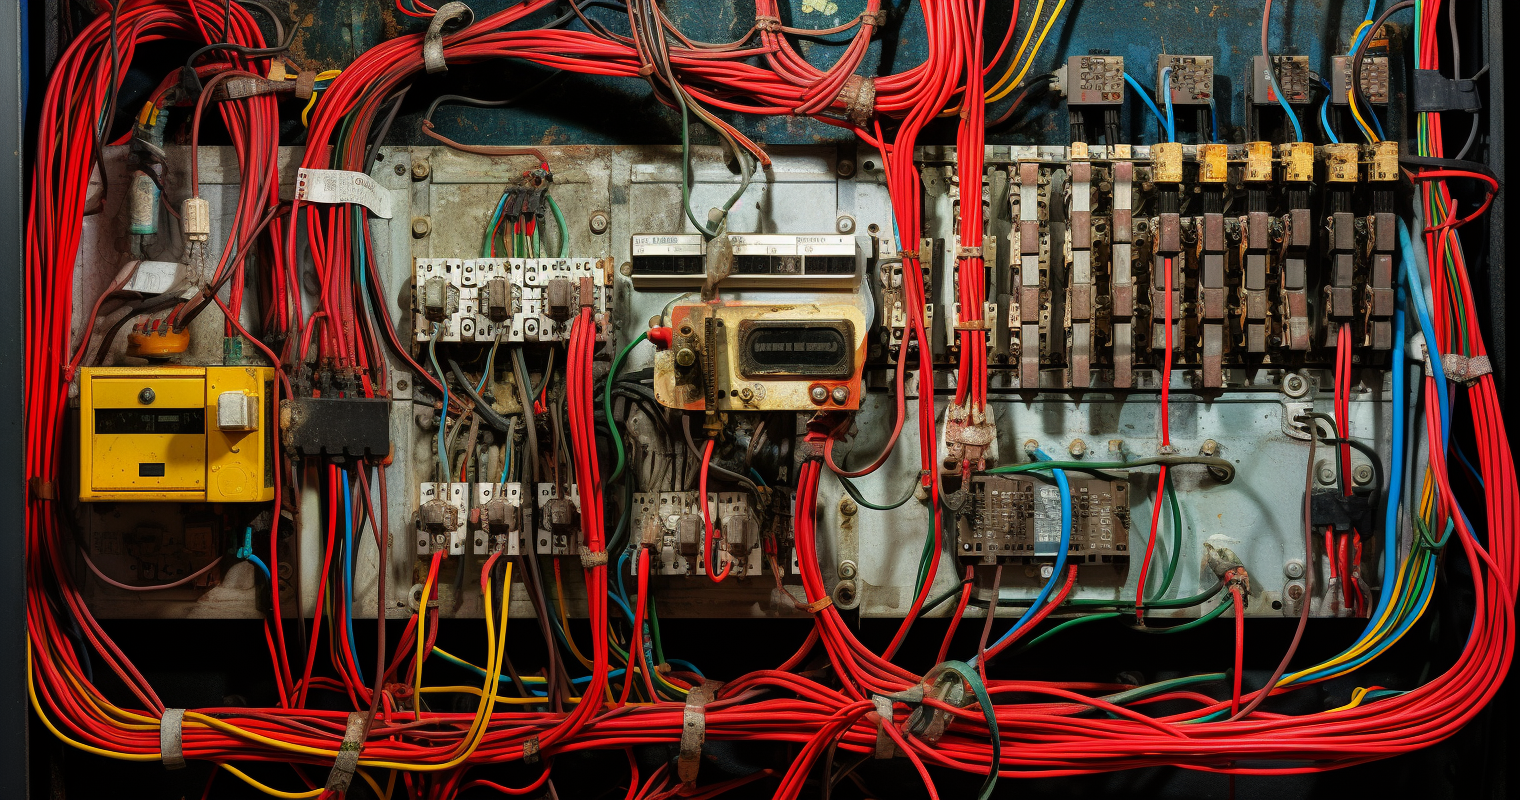 Electrical Wiring Mistakes - Common Errors